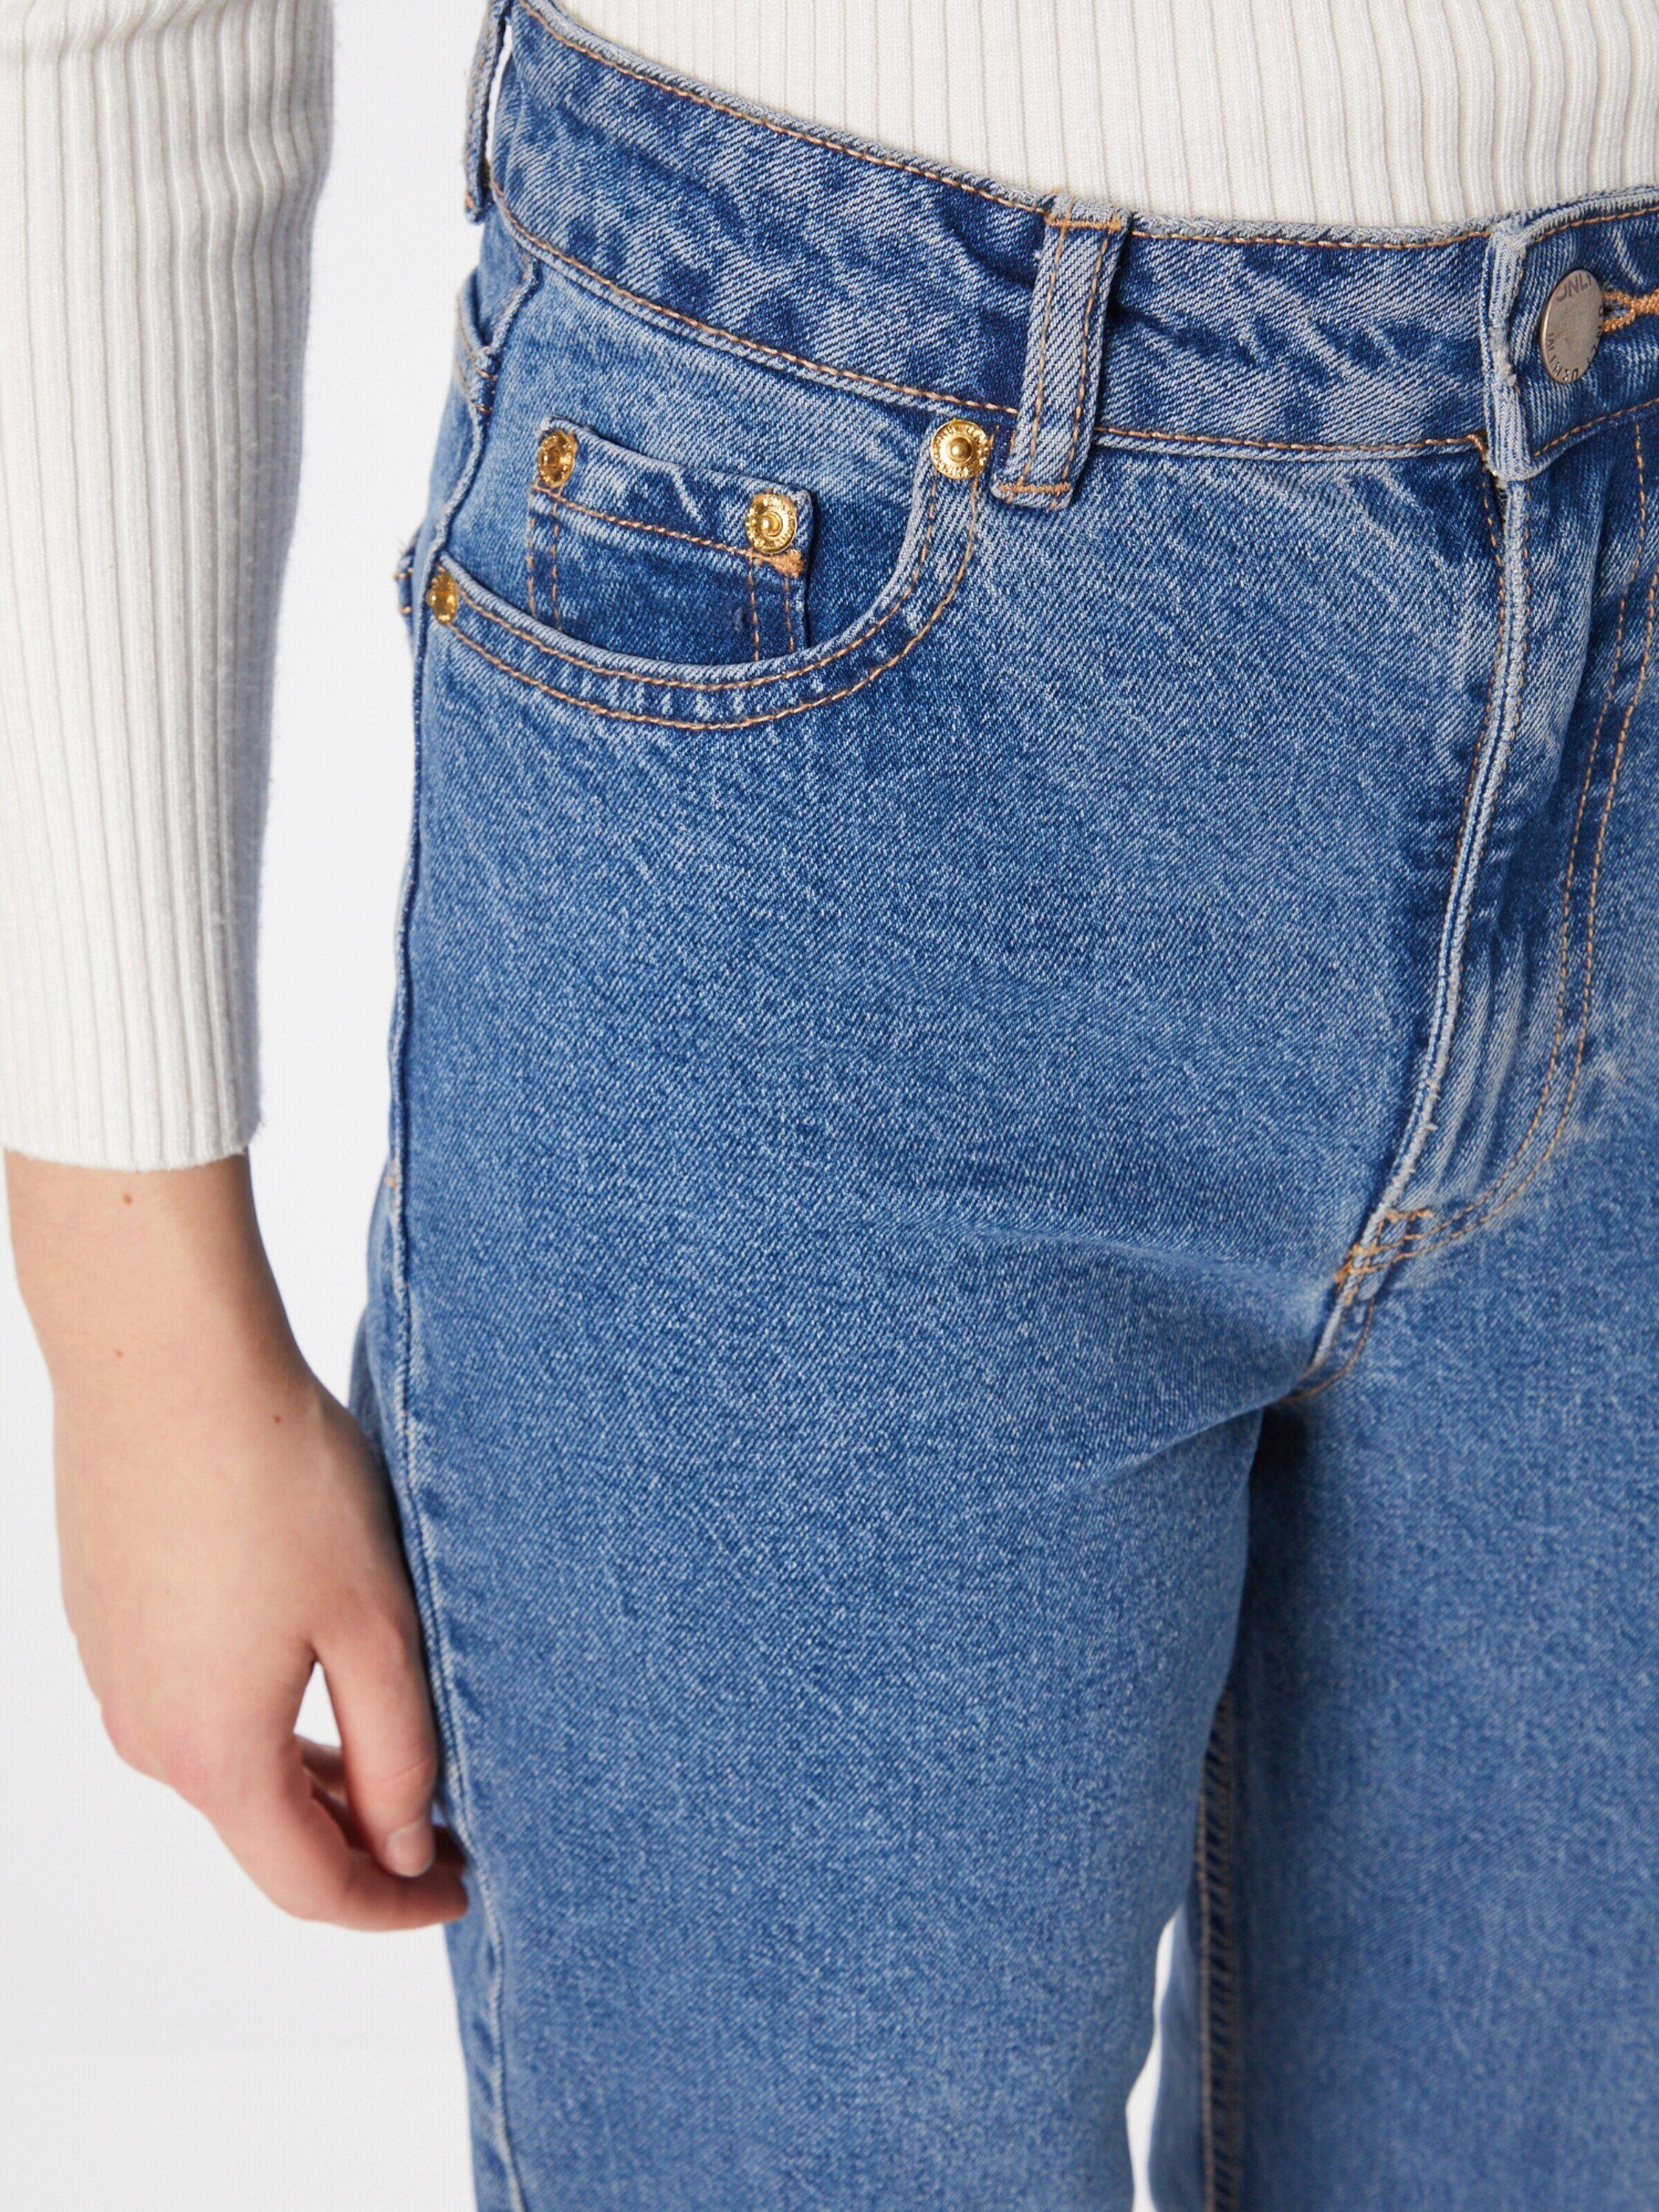 Plain/ohne Camille (1-tlg) Jeans Weiteres ONLY Detail Details, Weite